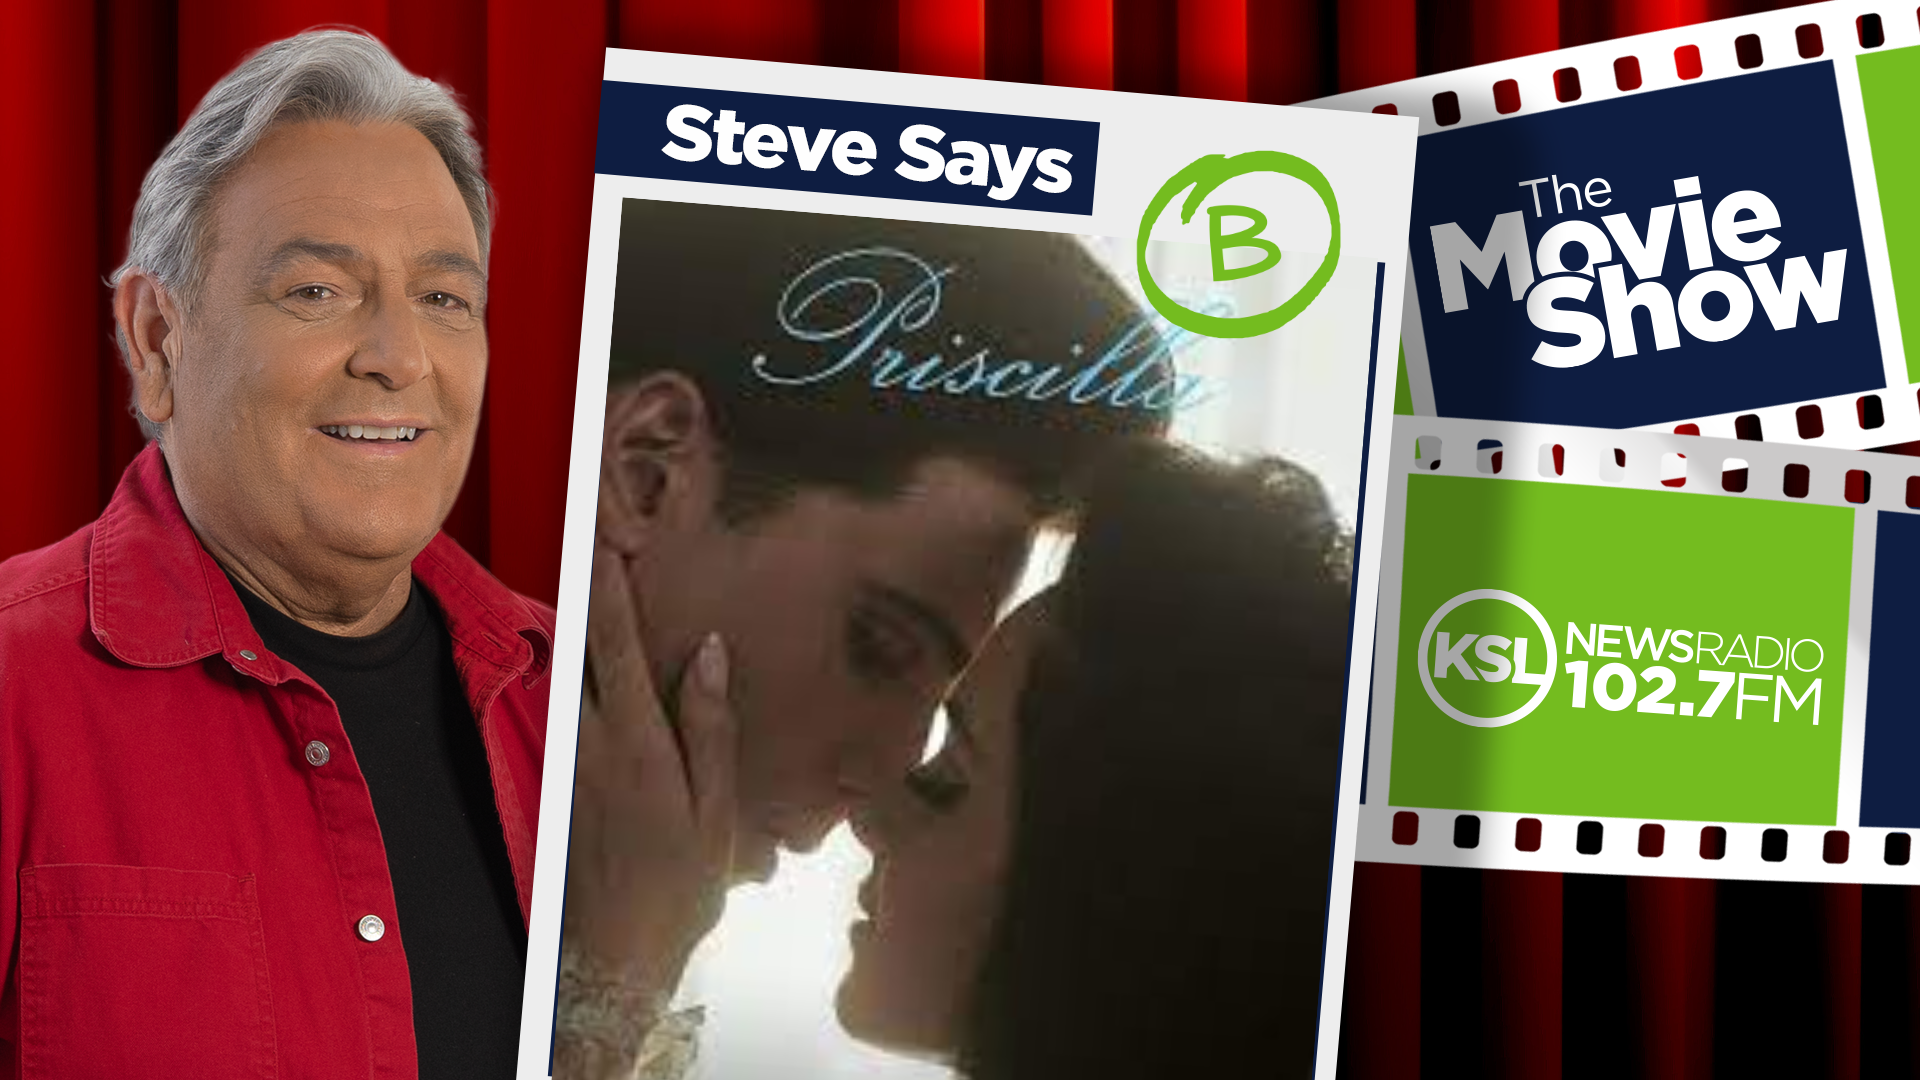 The KSL Movie Show review gives "Priscilla" a B grade for its truth despite being ugly....